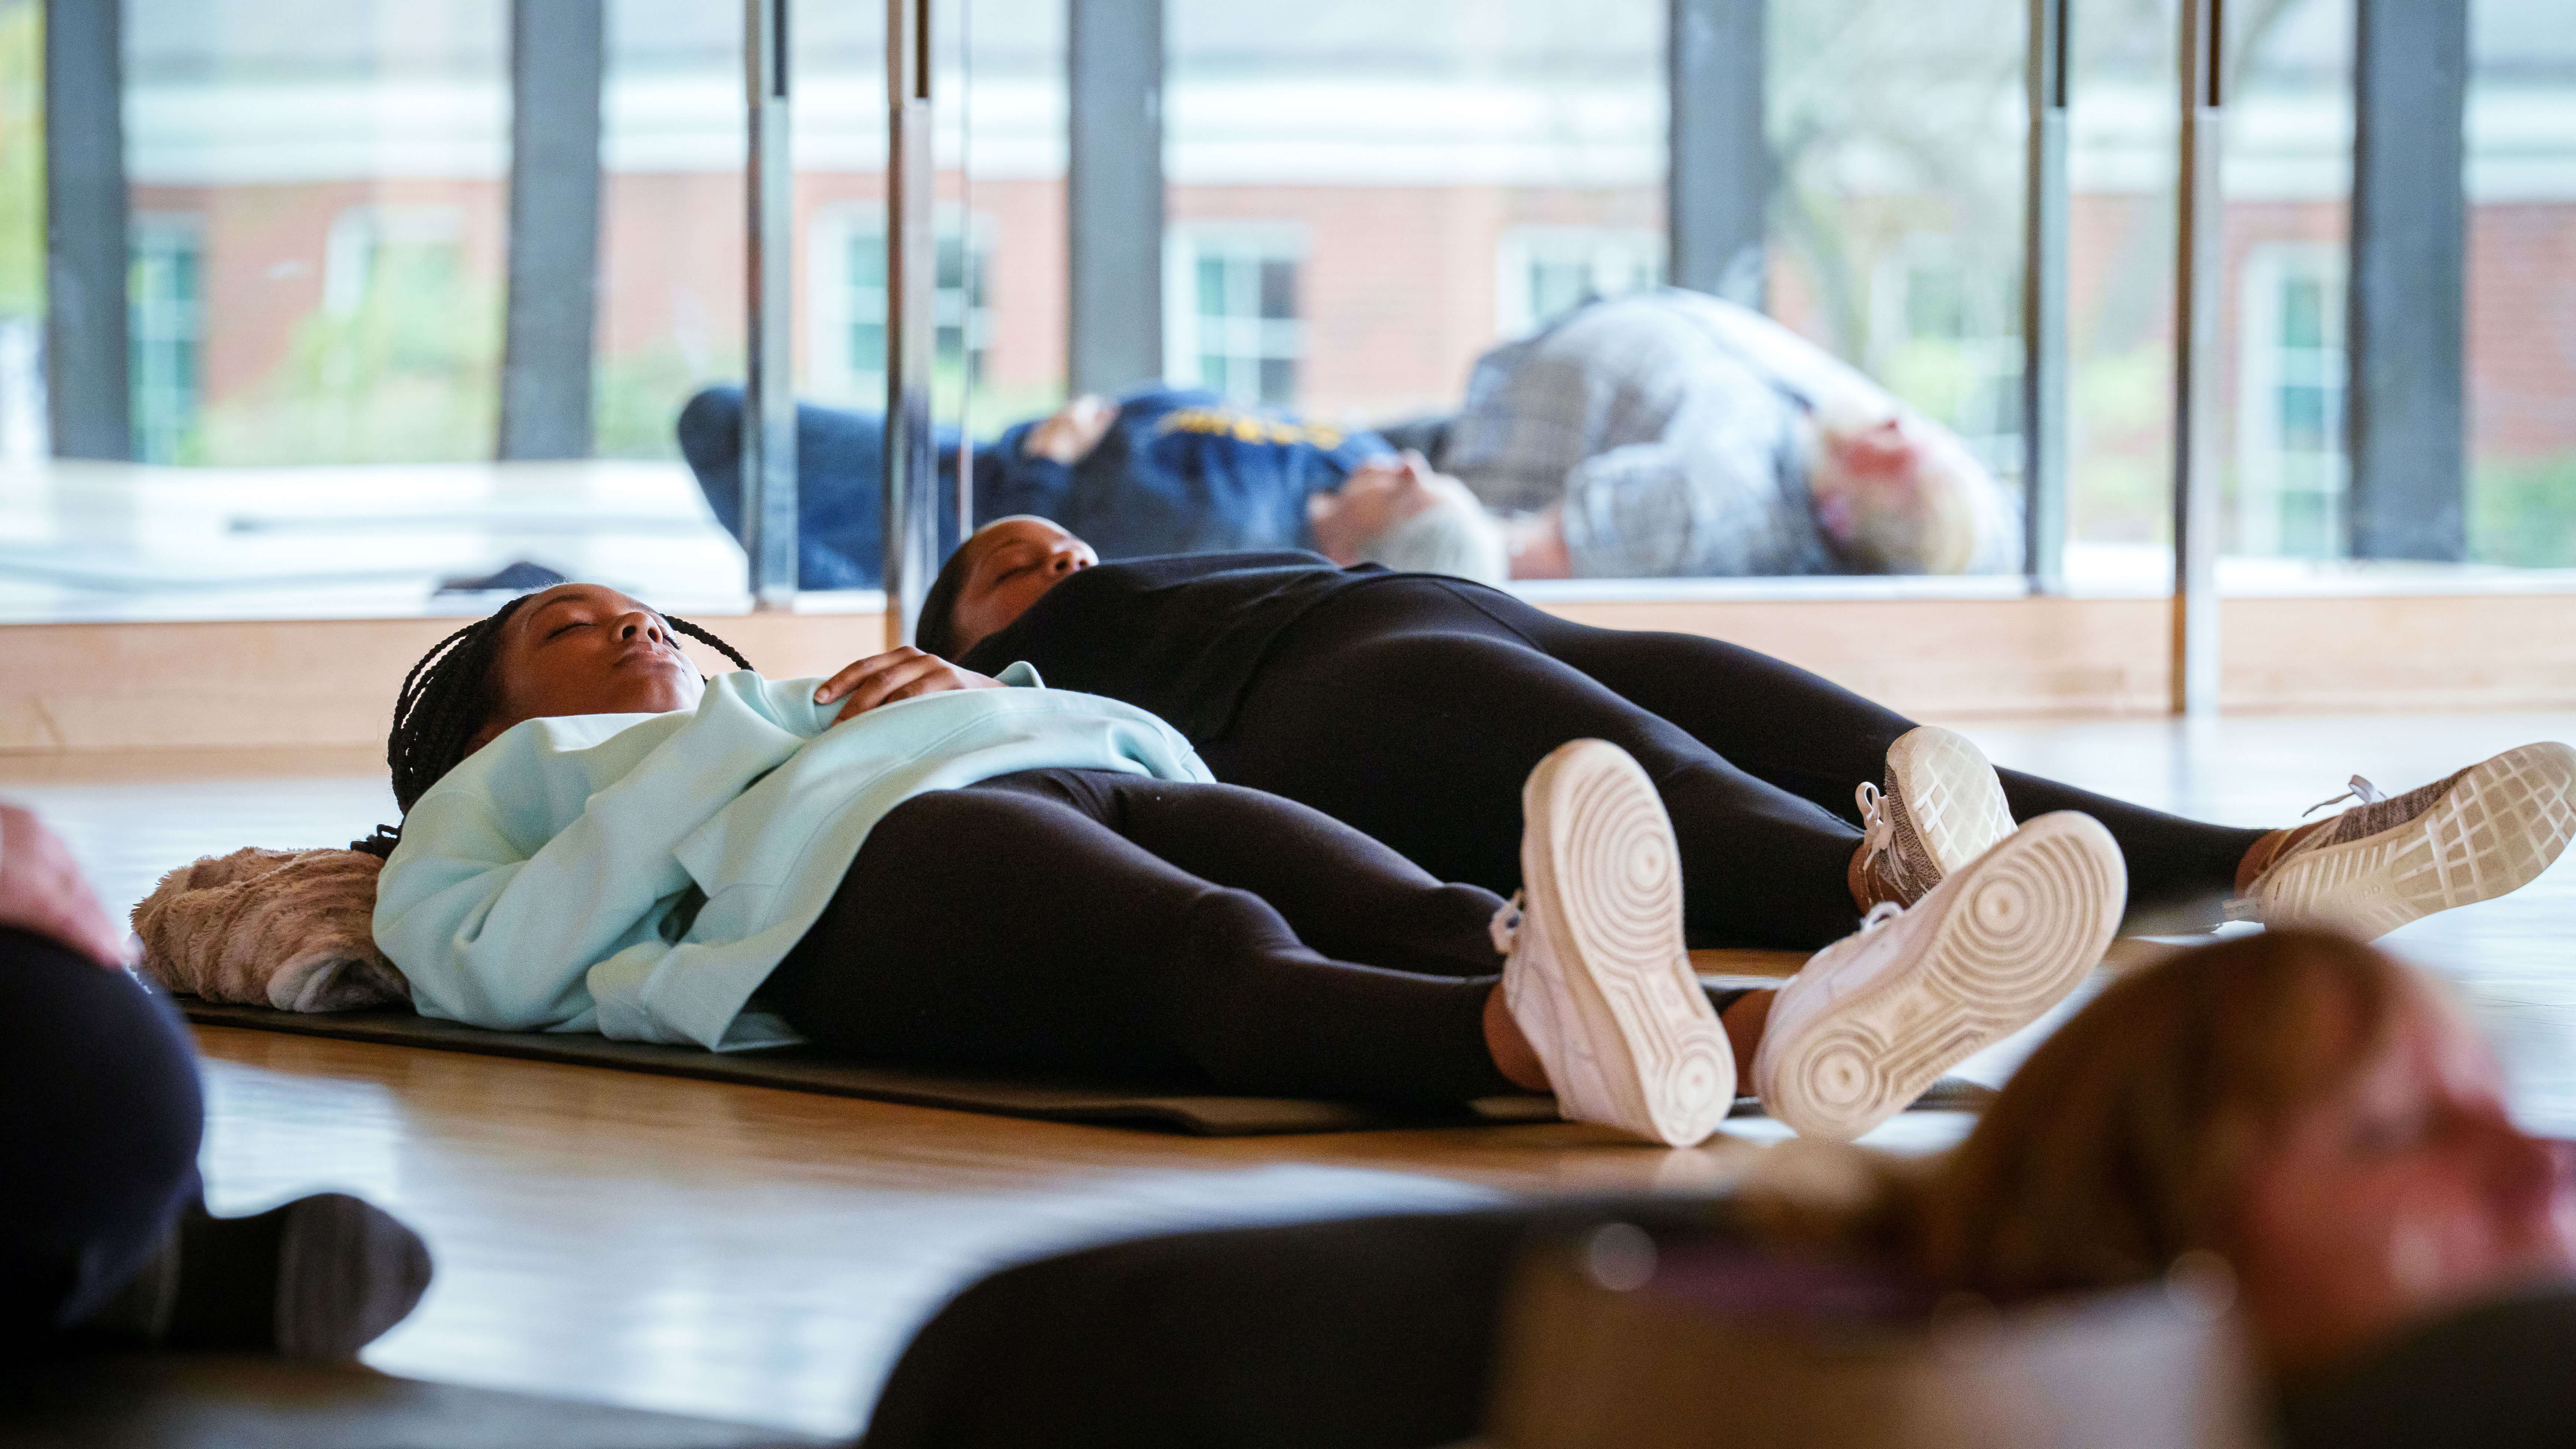 Two women lay down on yoga mats during a mindfulness event on bobcat weekend.